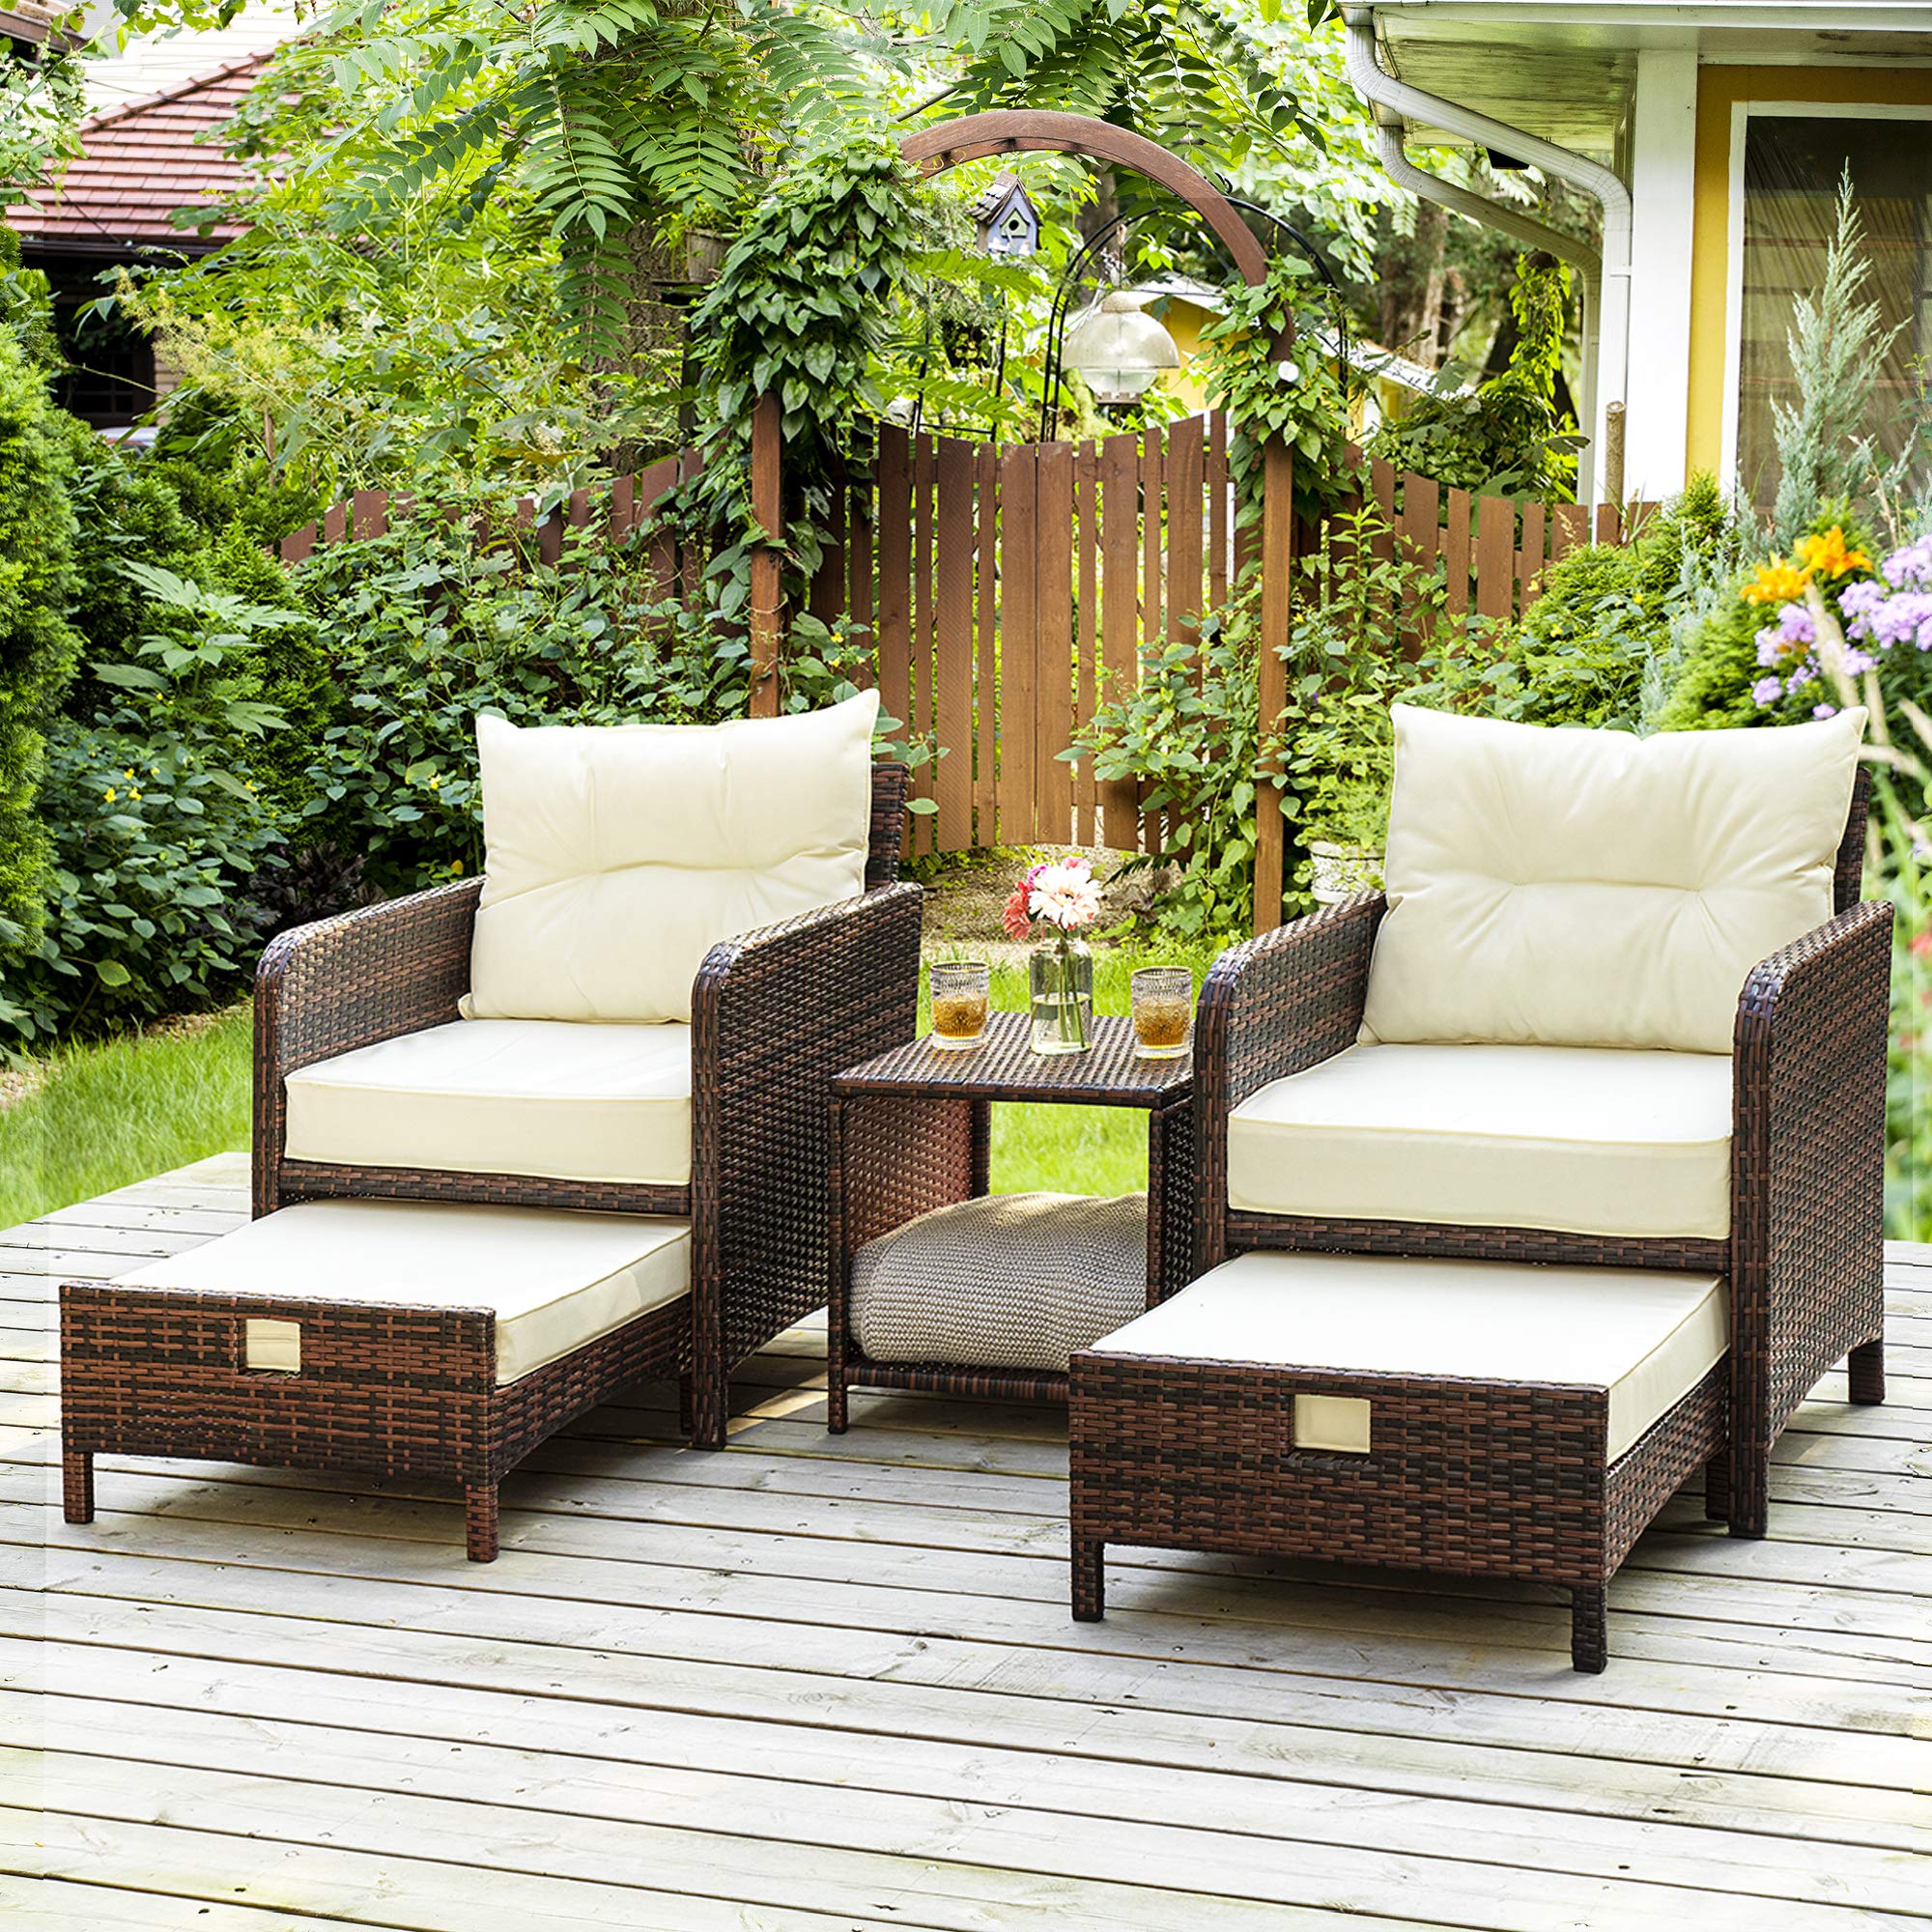 Tips for Choosing the Perfect Patio Seating - Soothe Seating